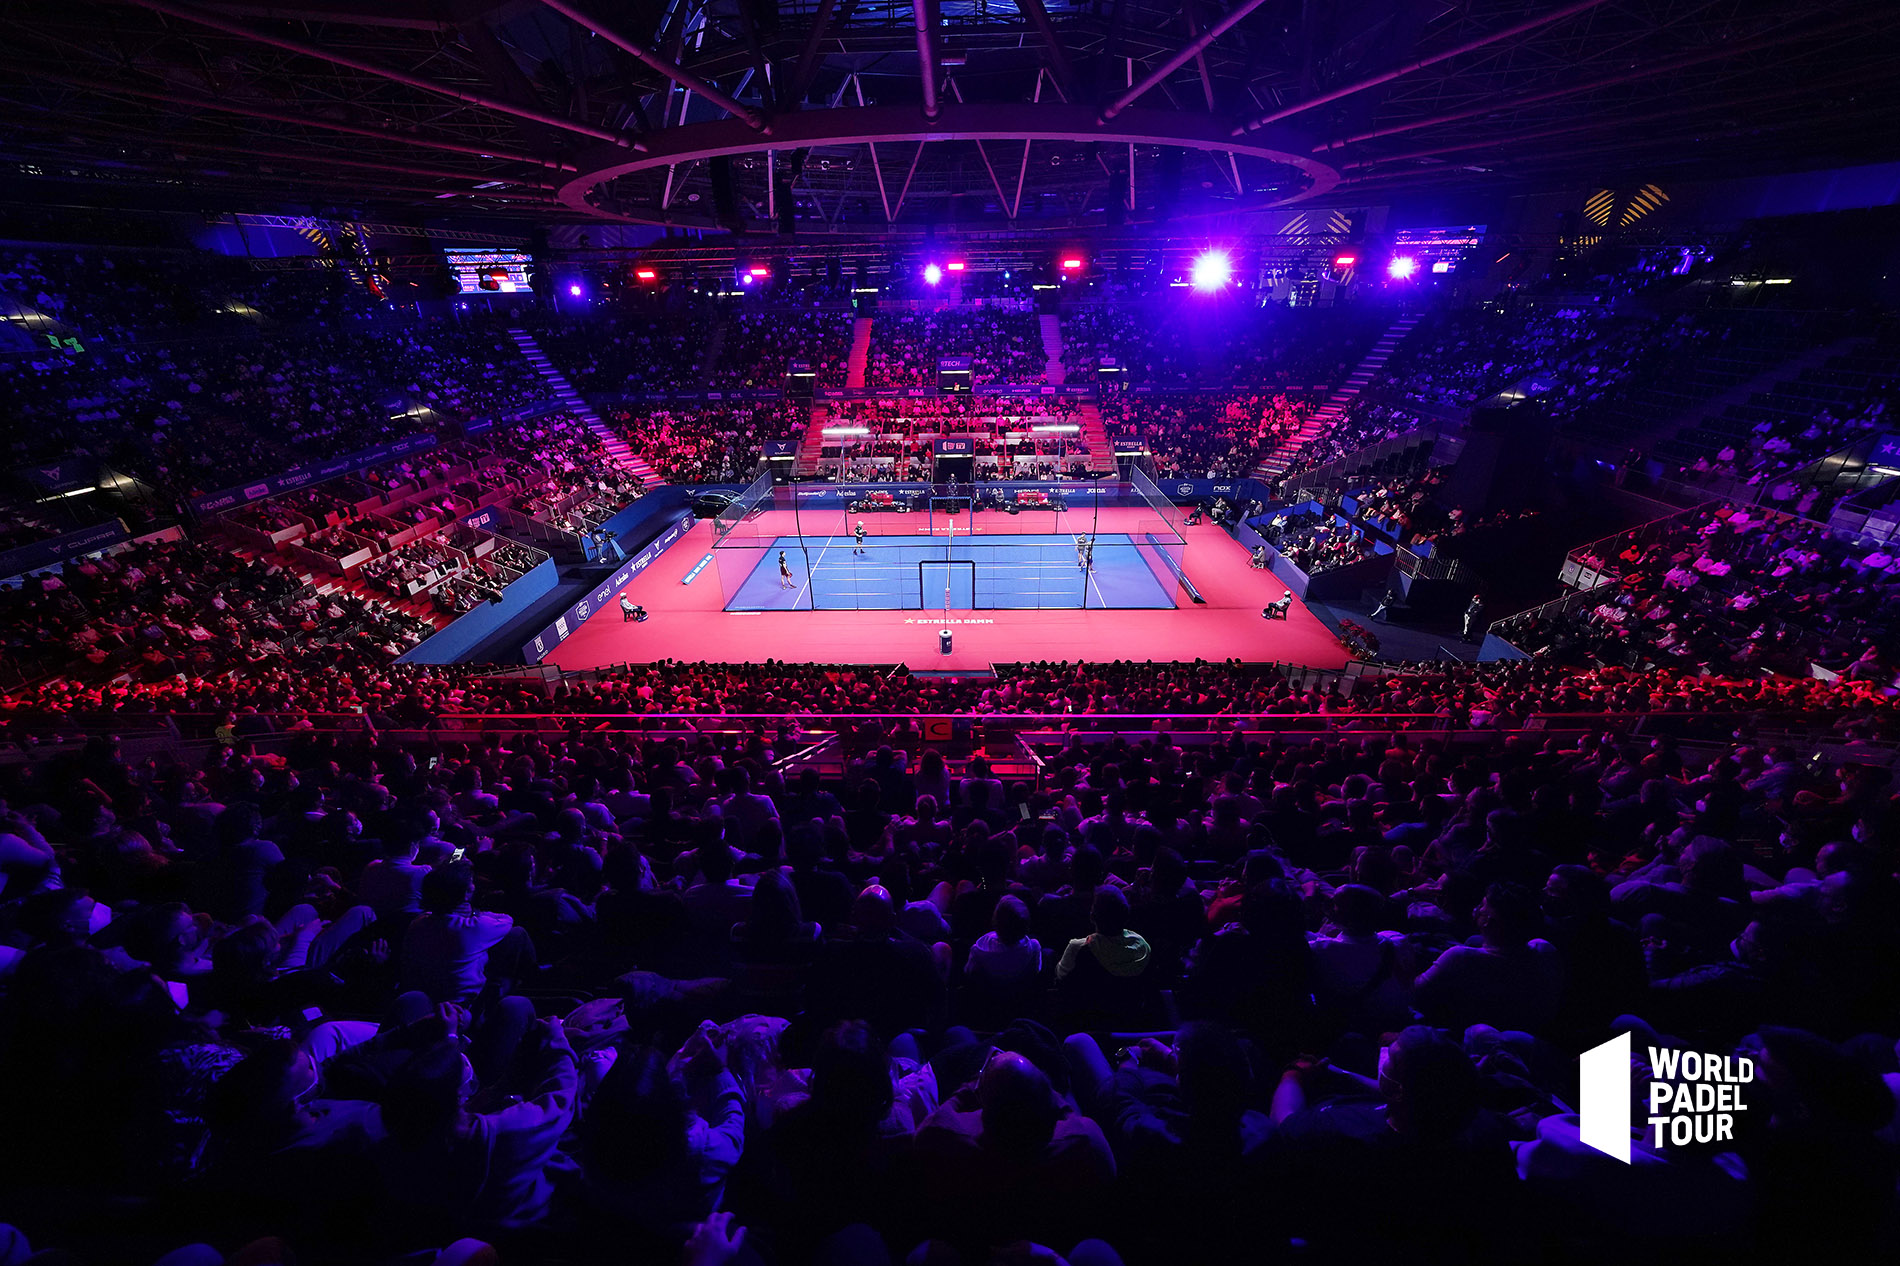 Mediapro acquires international broadcasting rights to World Padel Tour